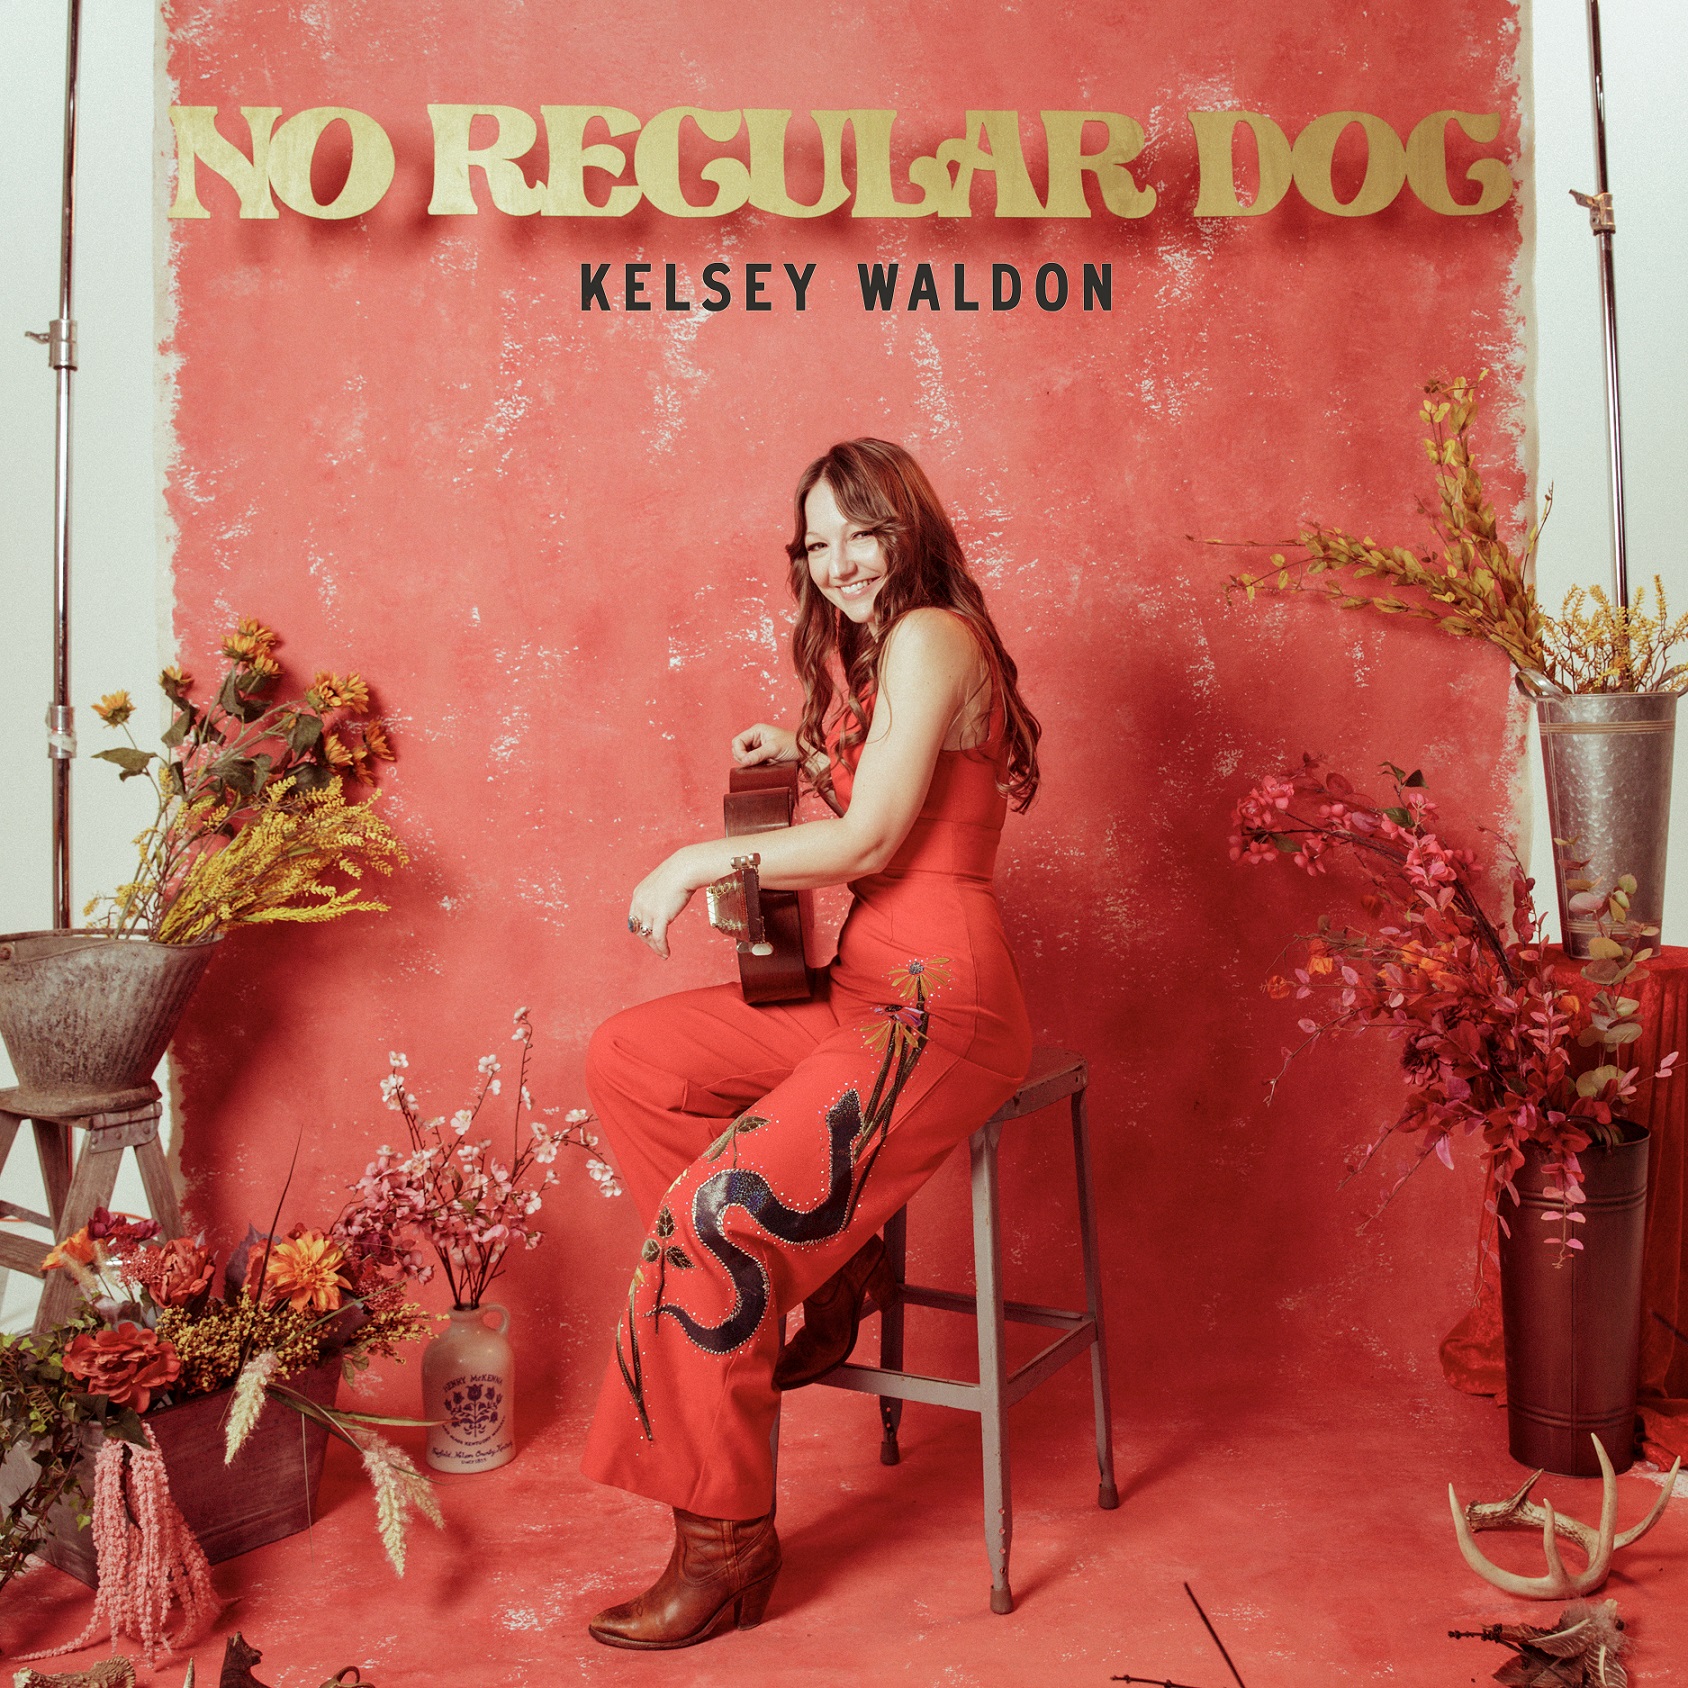 New deluxe version of Kelsey Waldon’s "No Regular Dog" out April 14